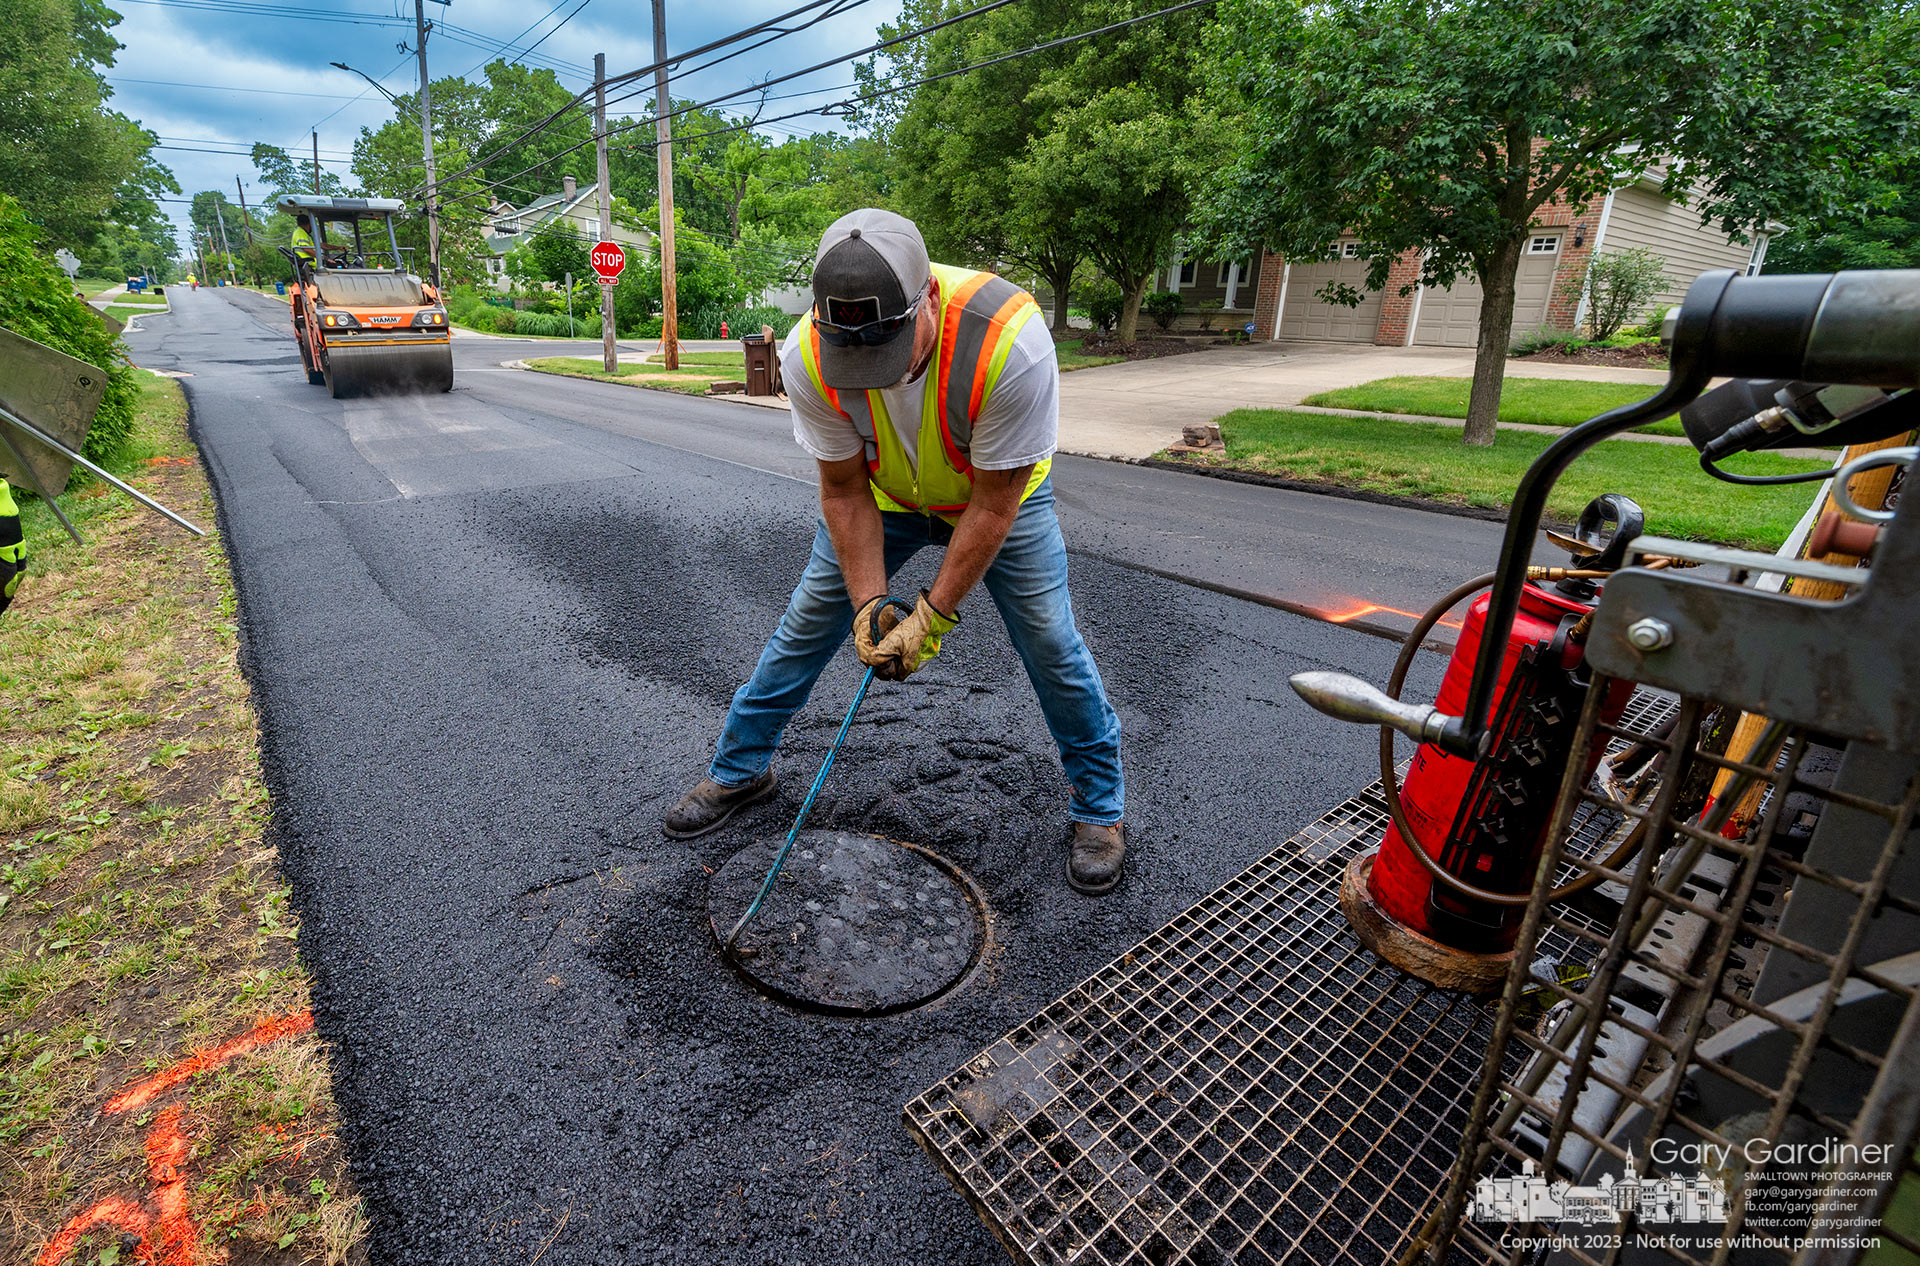 A worker settles a manhole cover into place after resetting its height following the application of a final layer of asphalt on East College just past Otterbein Avenue. My final Photo for June 20, 2023.